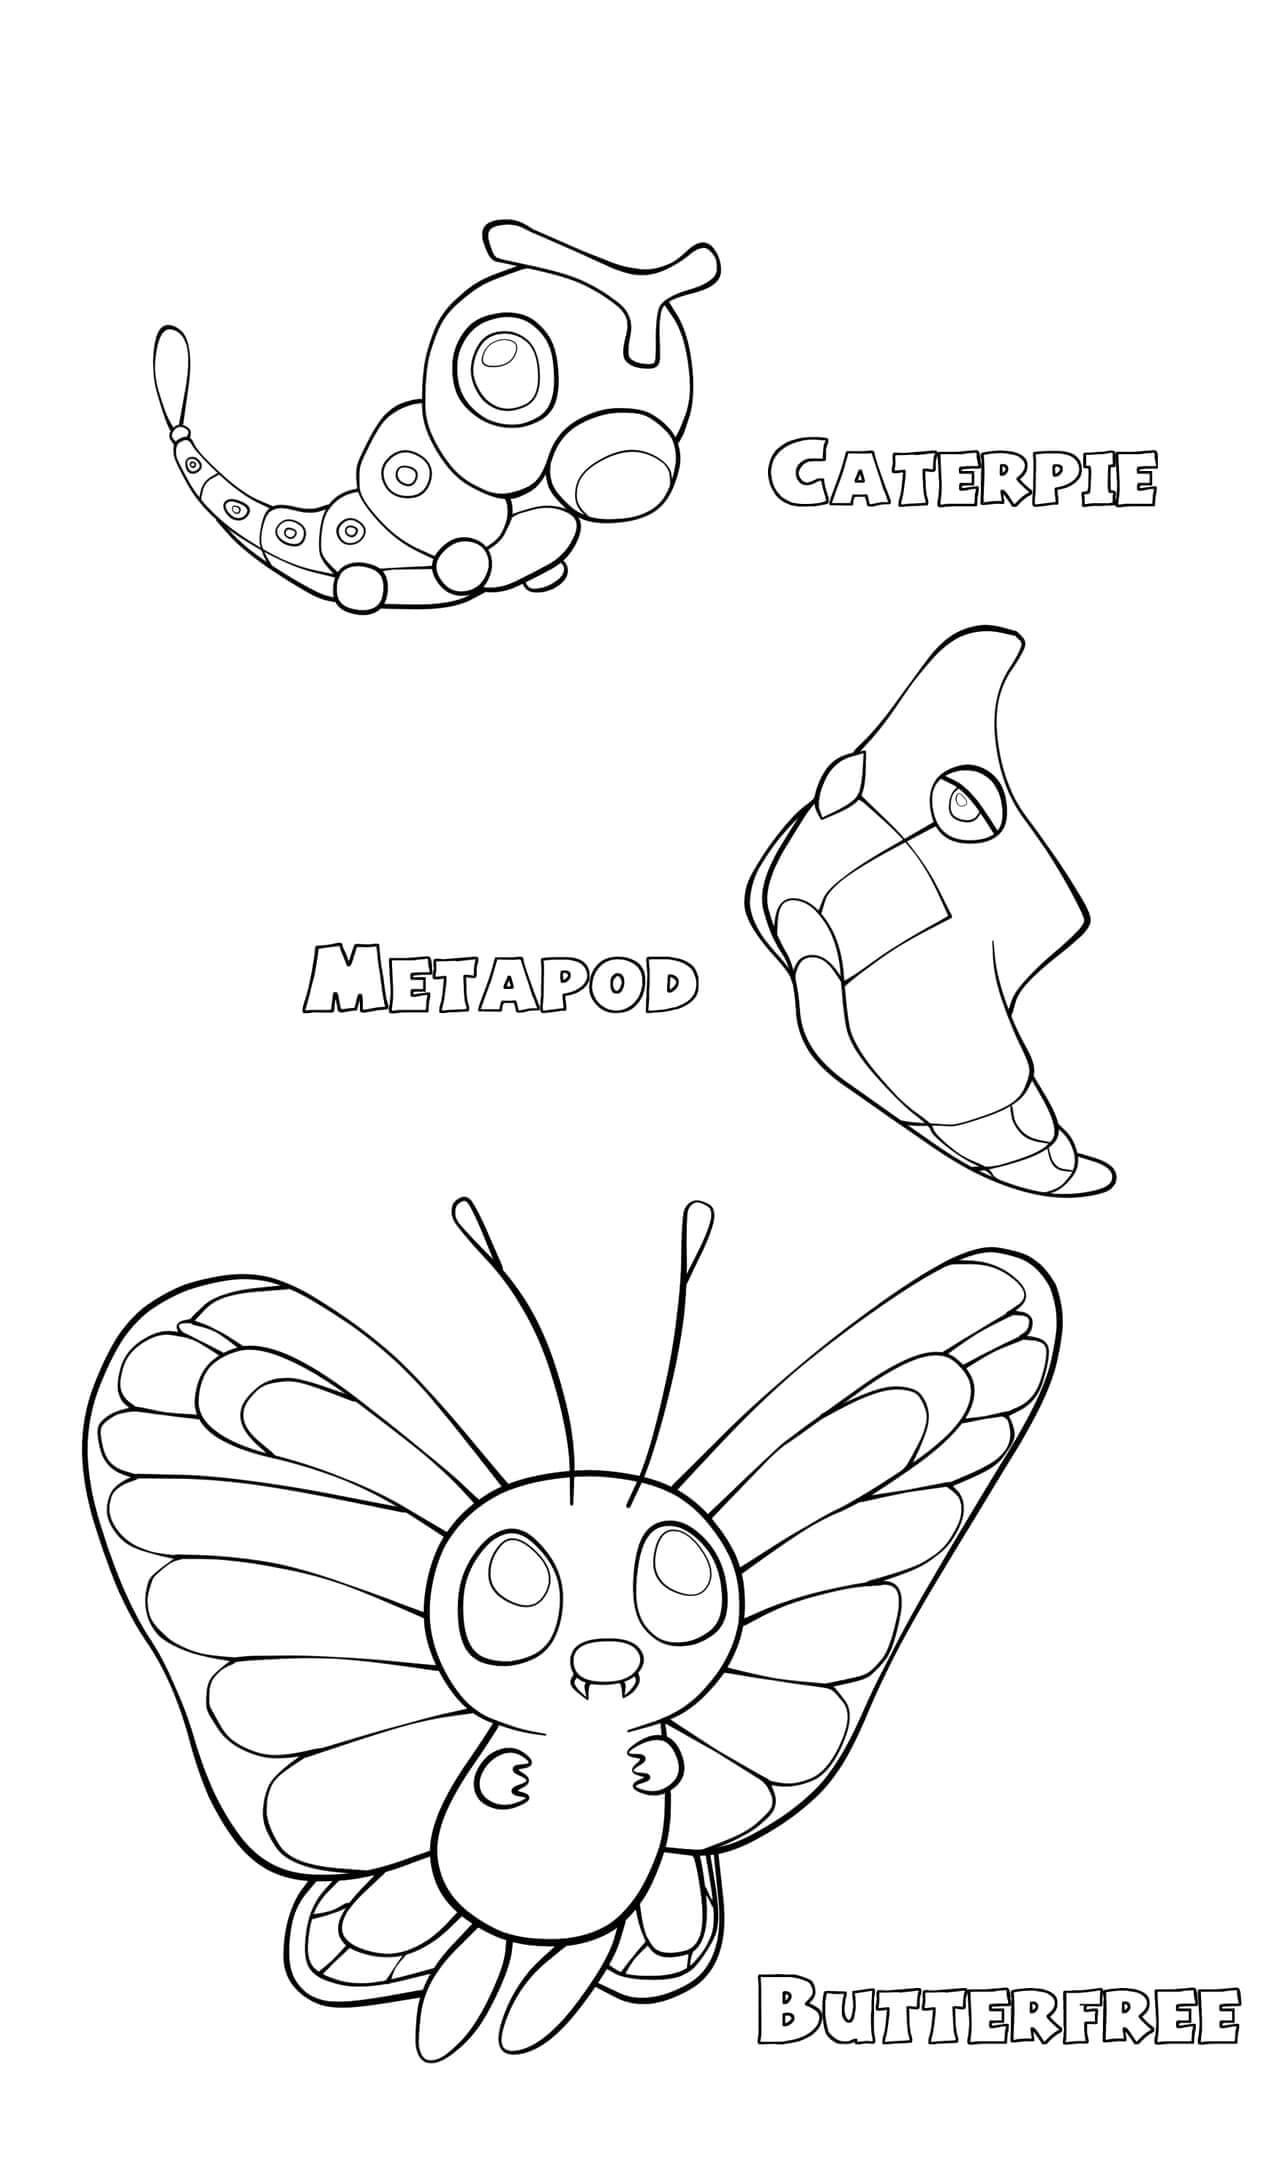 Caterpie 4 Coloring Page - Free Printable Coloring Pages for Kids